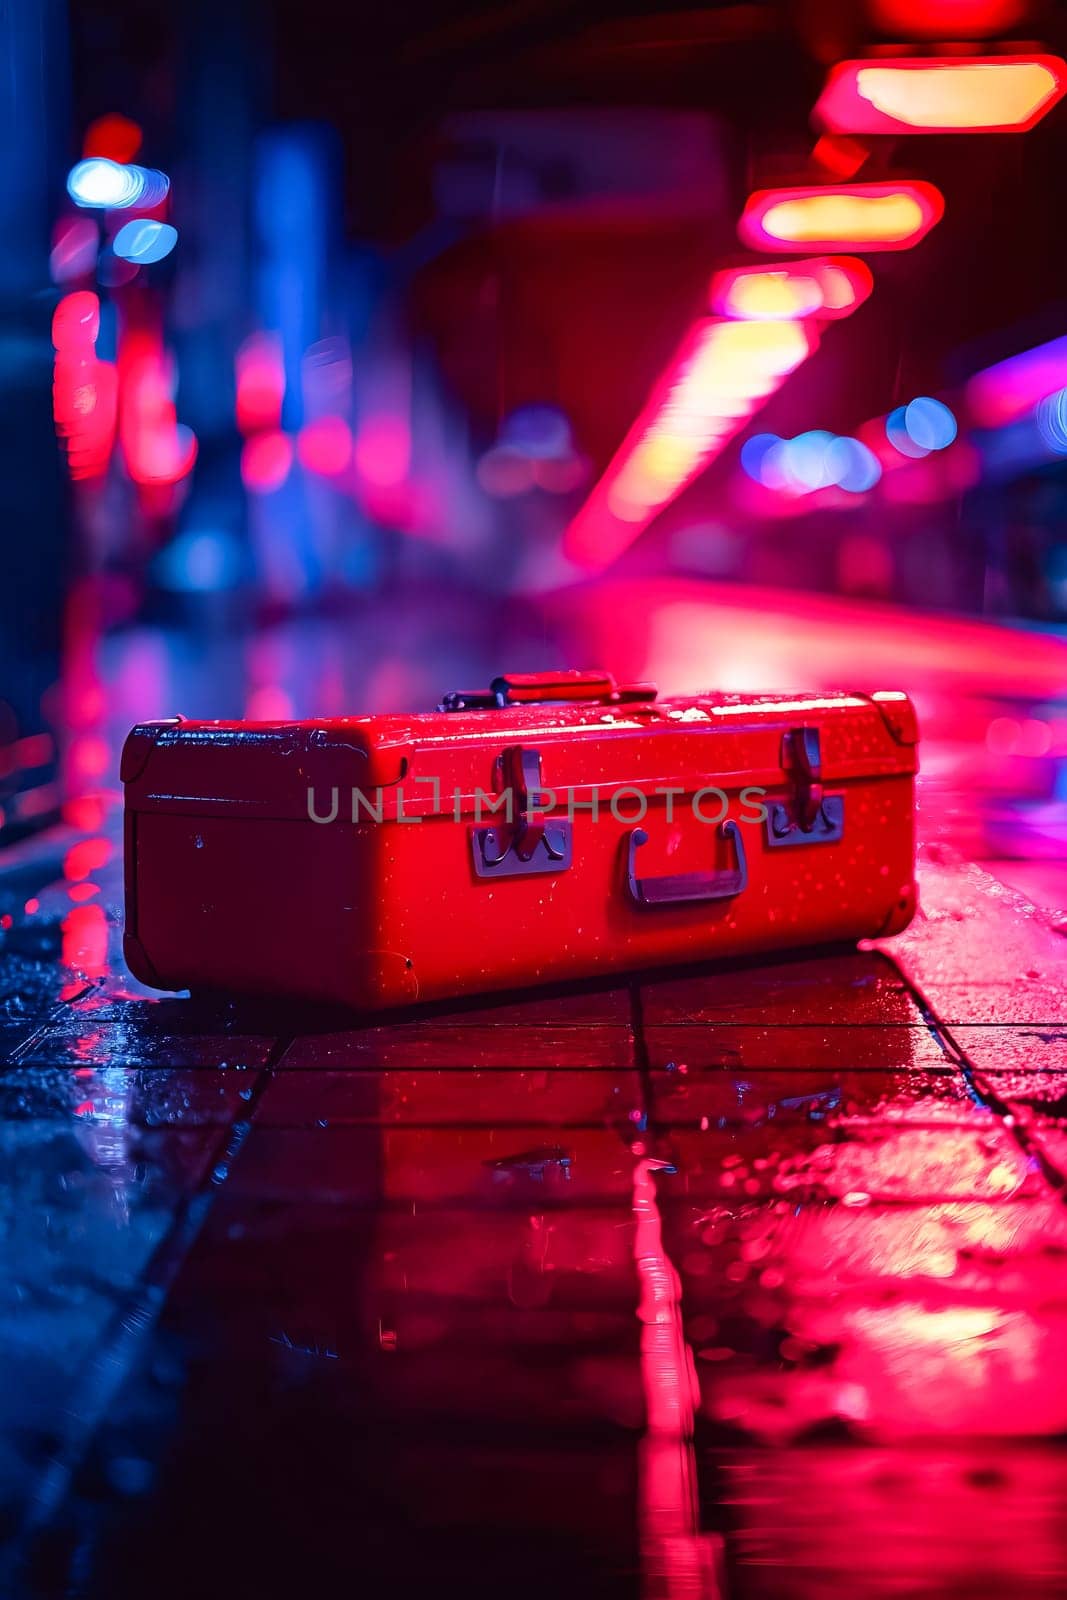 A red suitcase is sitting on a wet sidewalk. The scene is set in a city at night, with bright lights and a blurry background. The suitcase is the main focus of the image. Generative AI